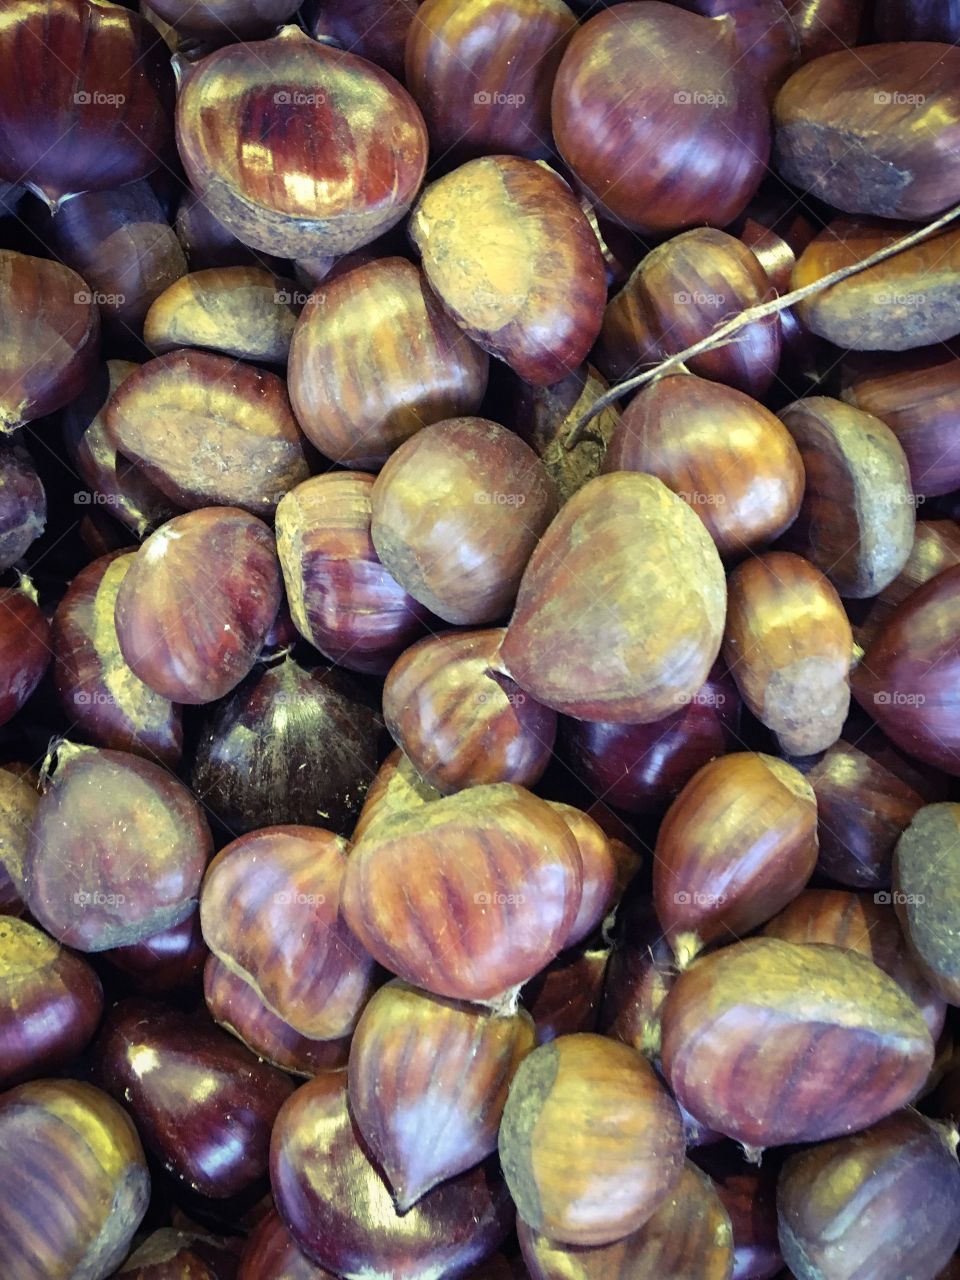 Chestnuts ready for roasting